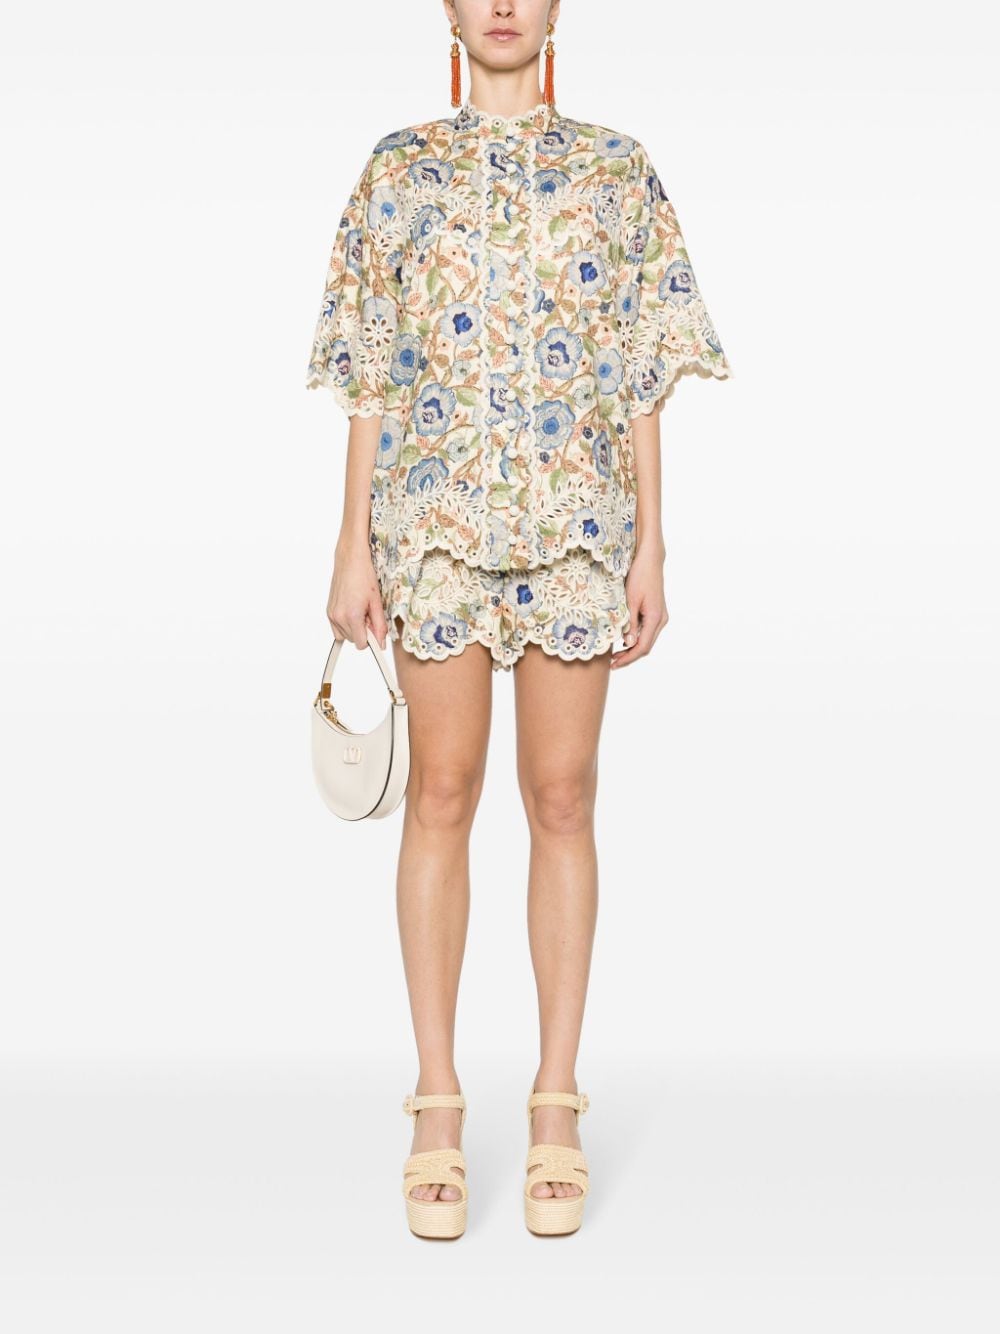 ZIMMERMANN Floral Embroidered Cotton Shirt for Women - White